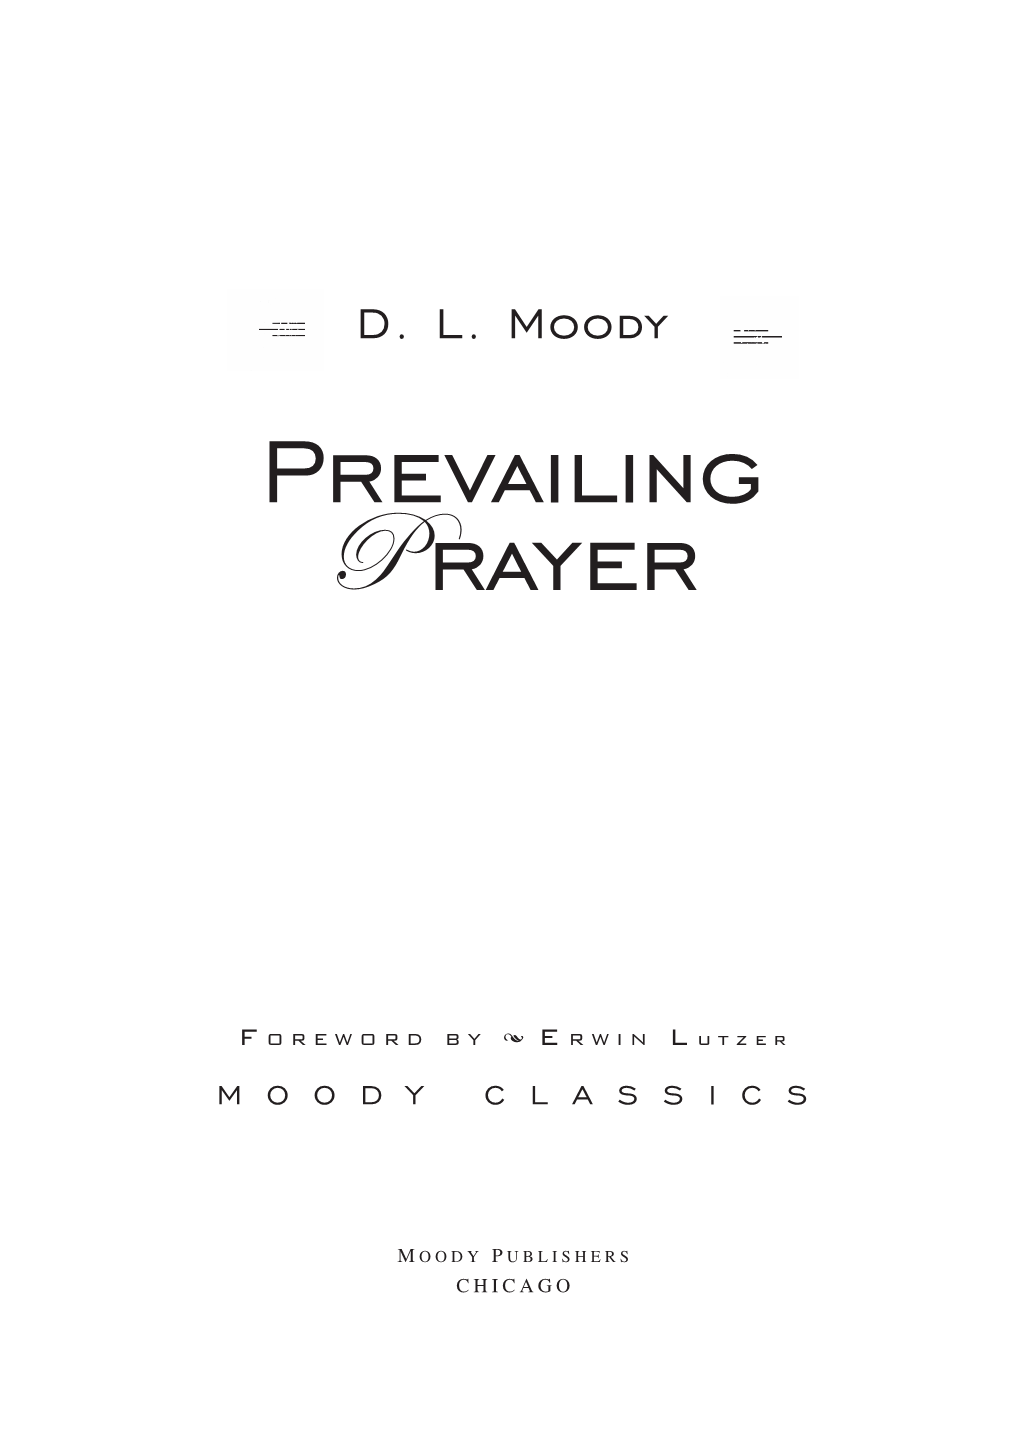 Prevailing Crayer